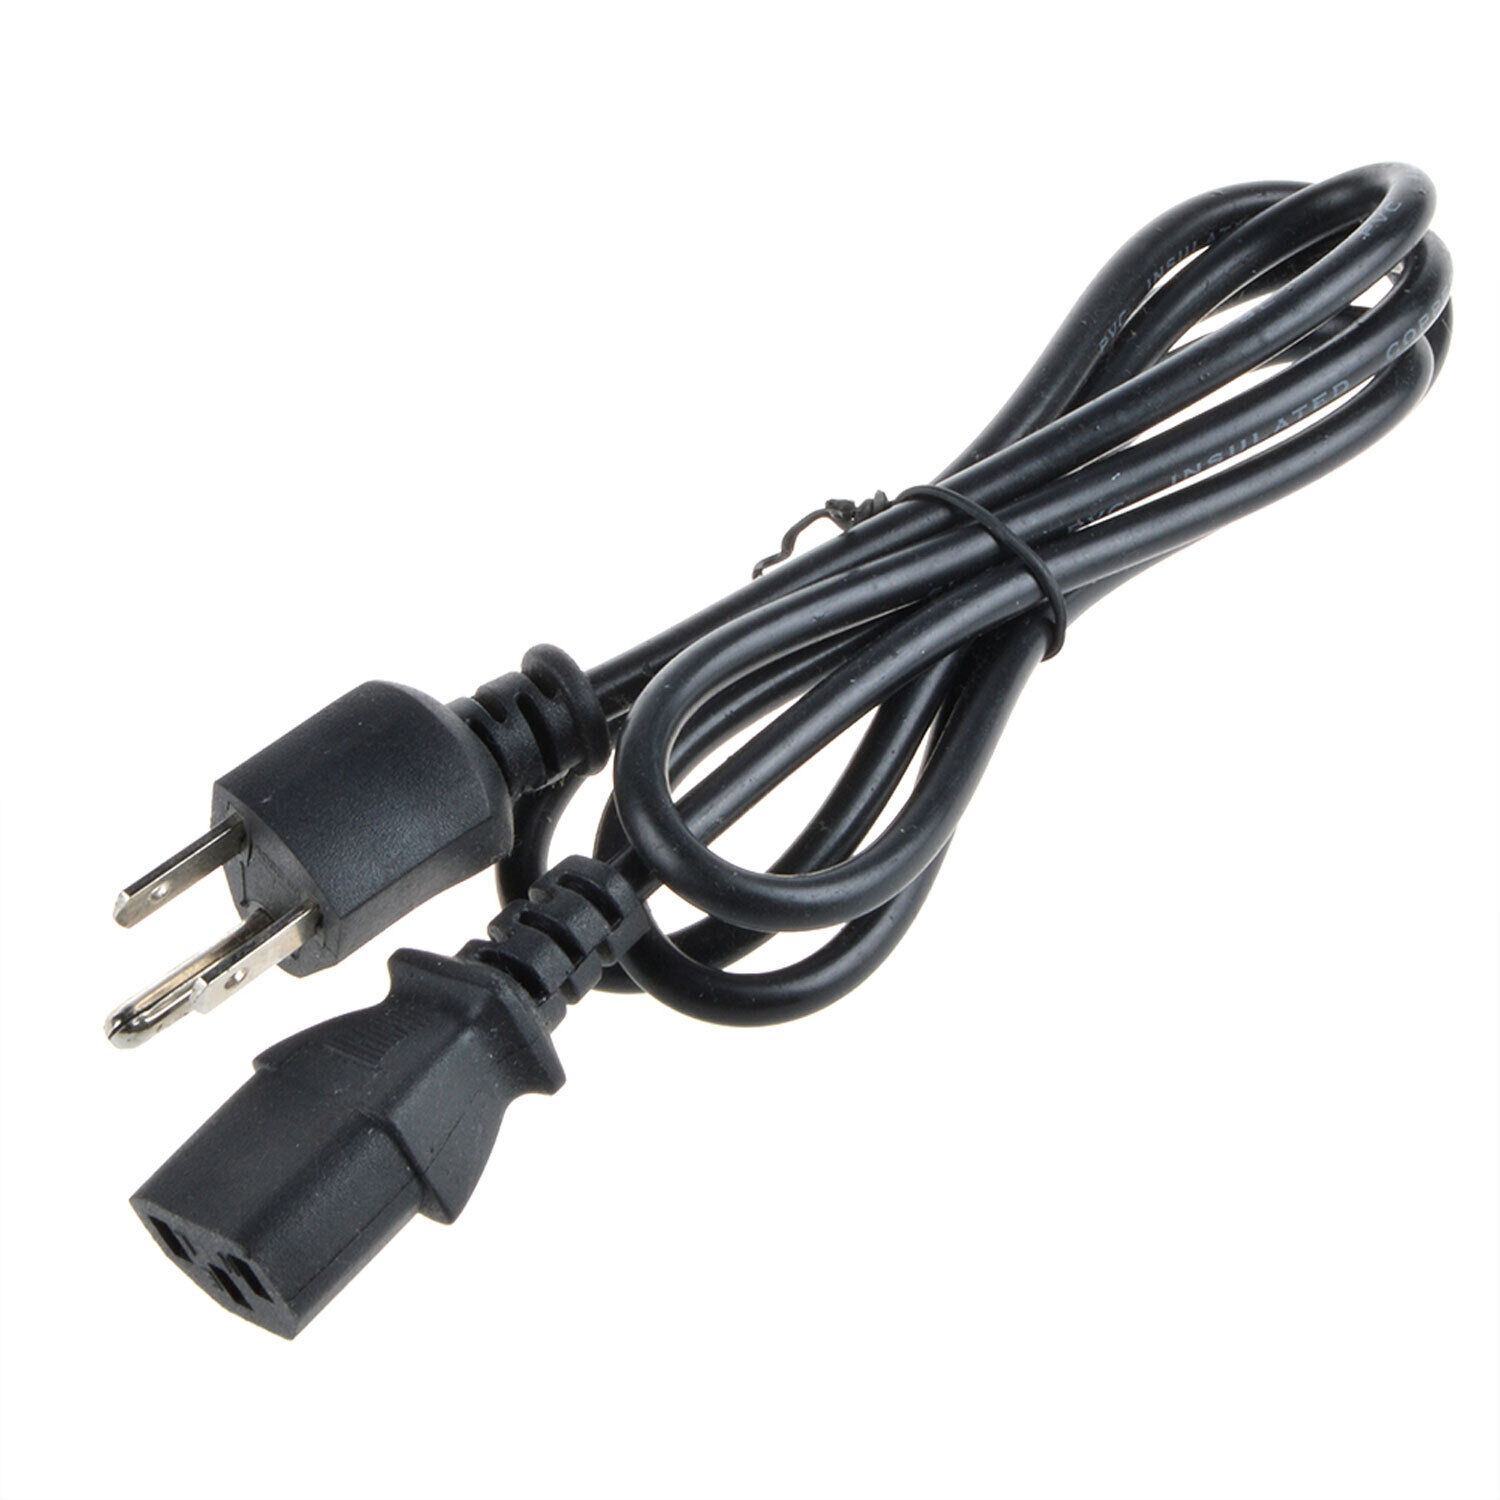 PwrON 5FT AC Power Cord Cable Lead for HP RP5 Retail System 5810 retail system